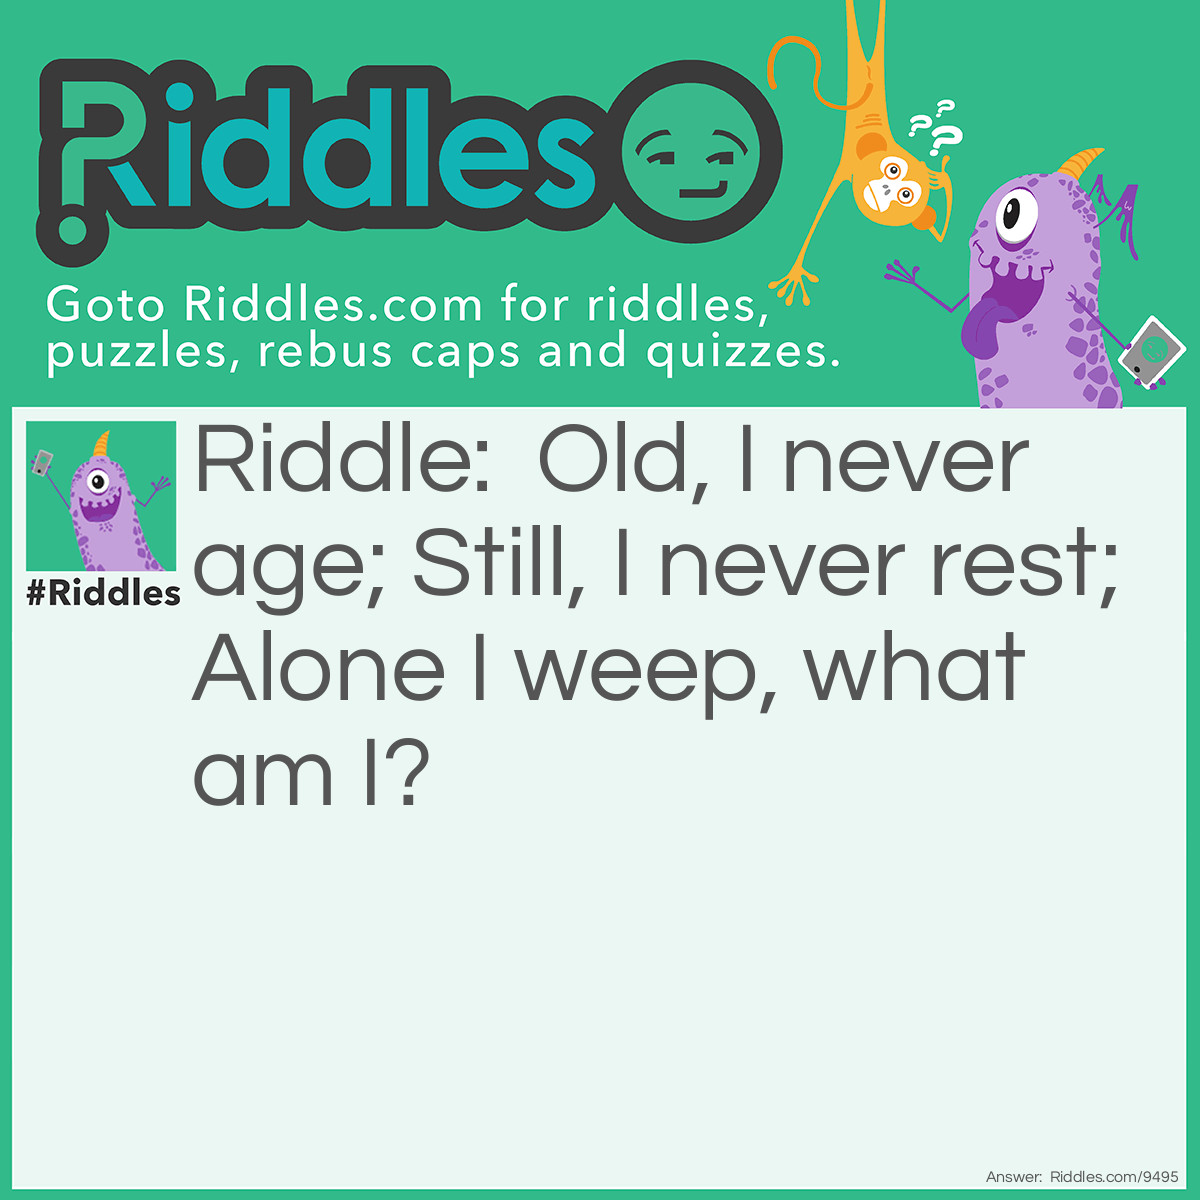 Riddle: Old, I never age; Still, I never rest; Alone I weep, what am I? Answer: A statue.